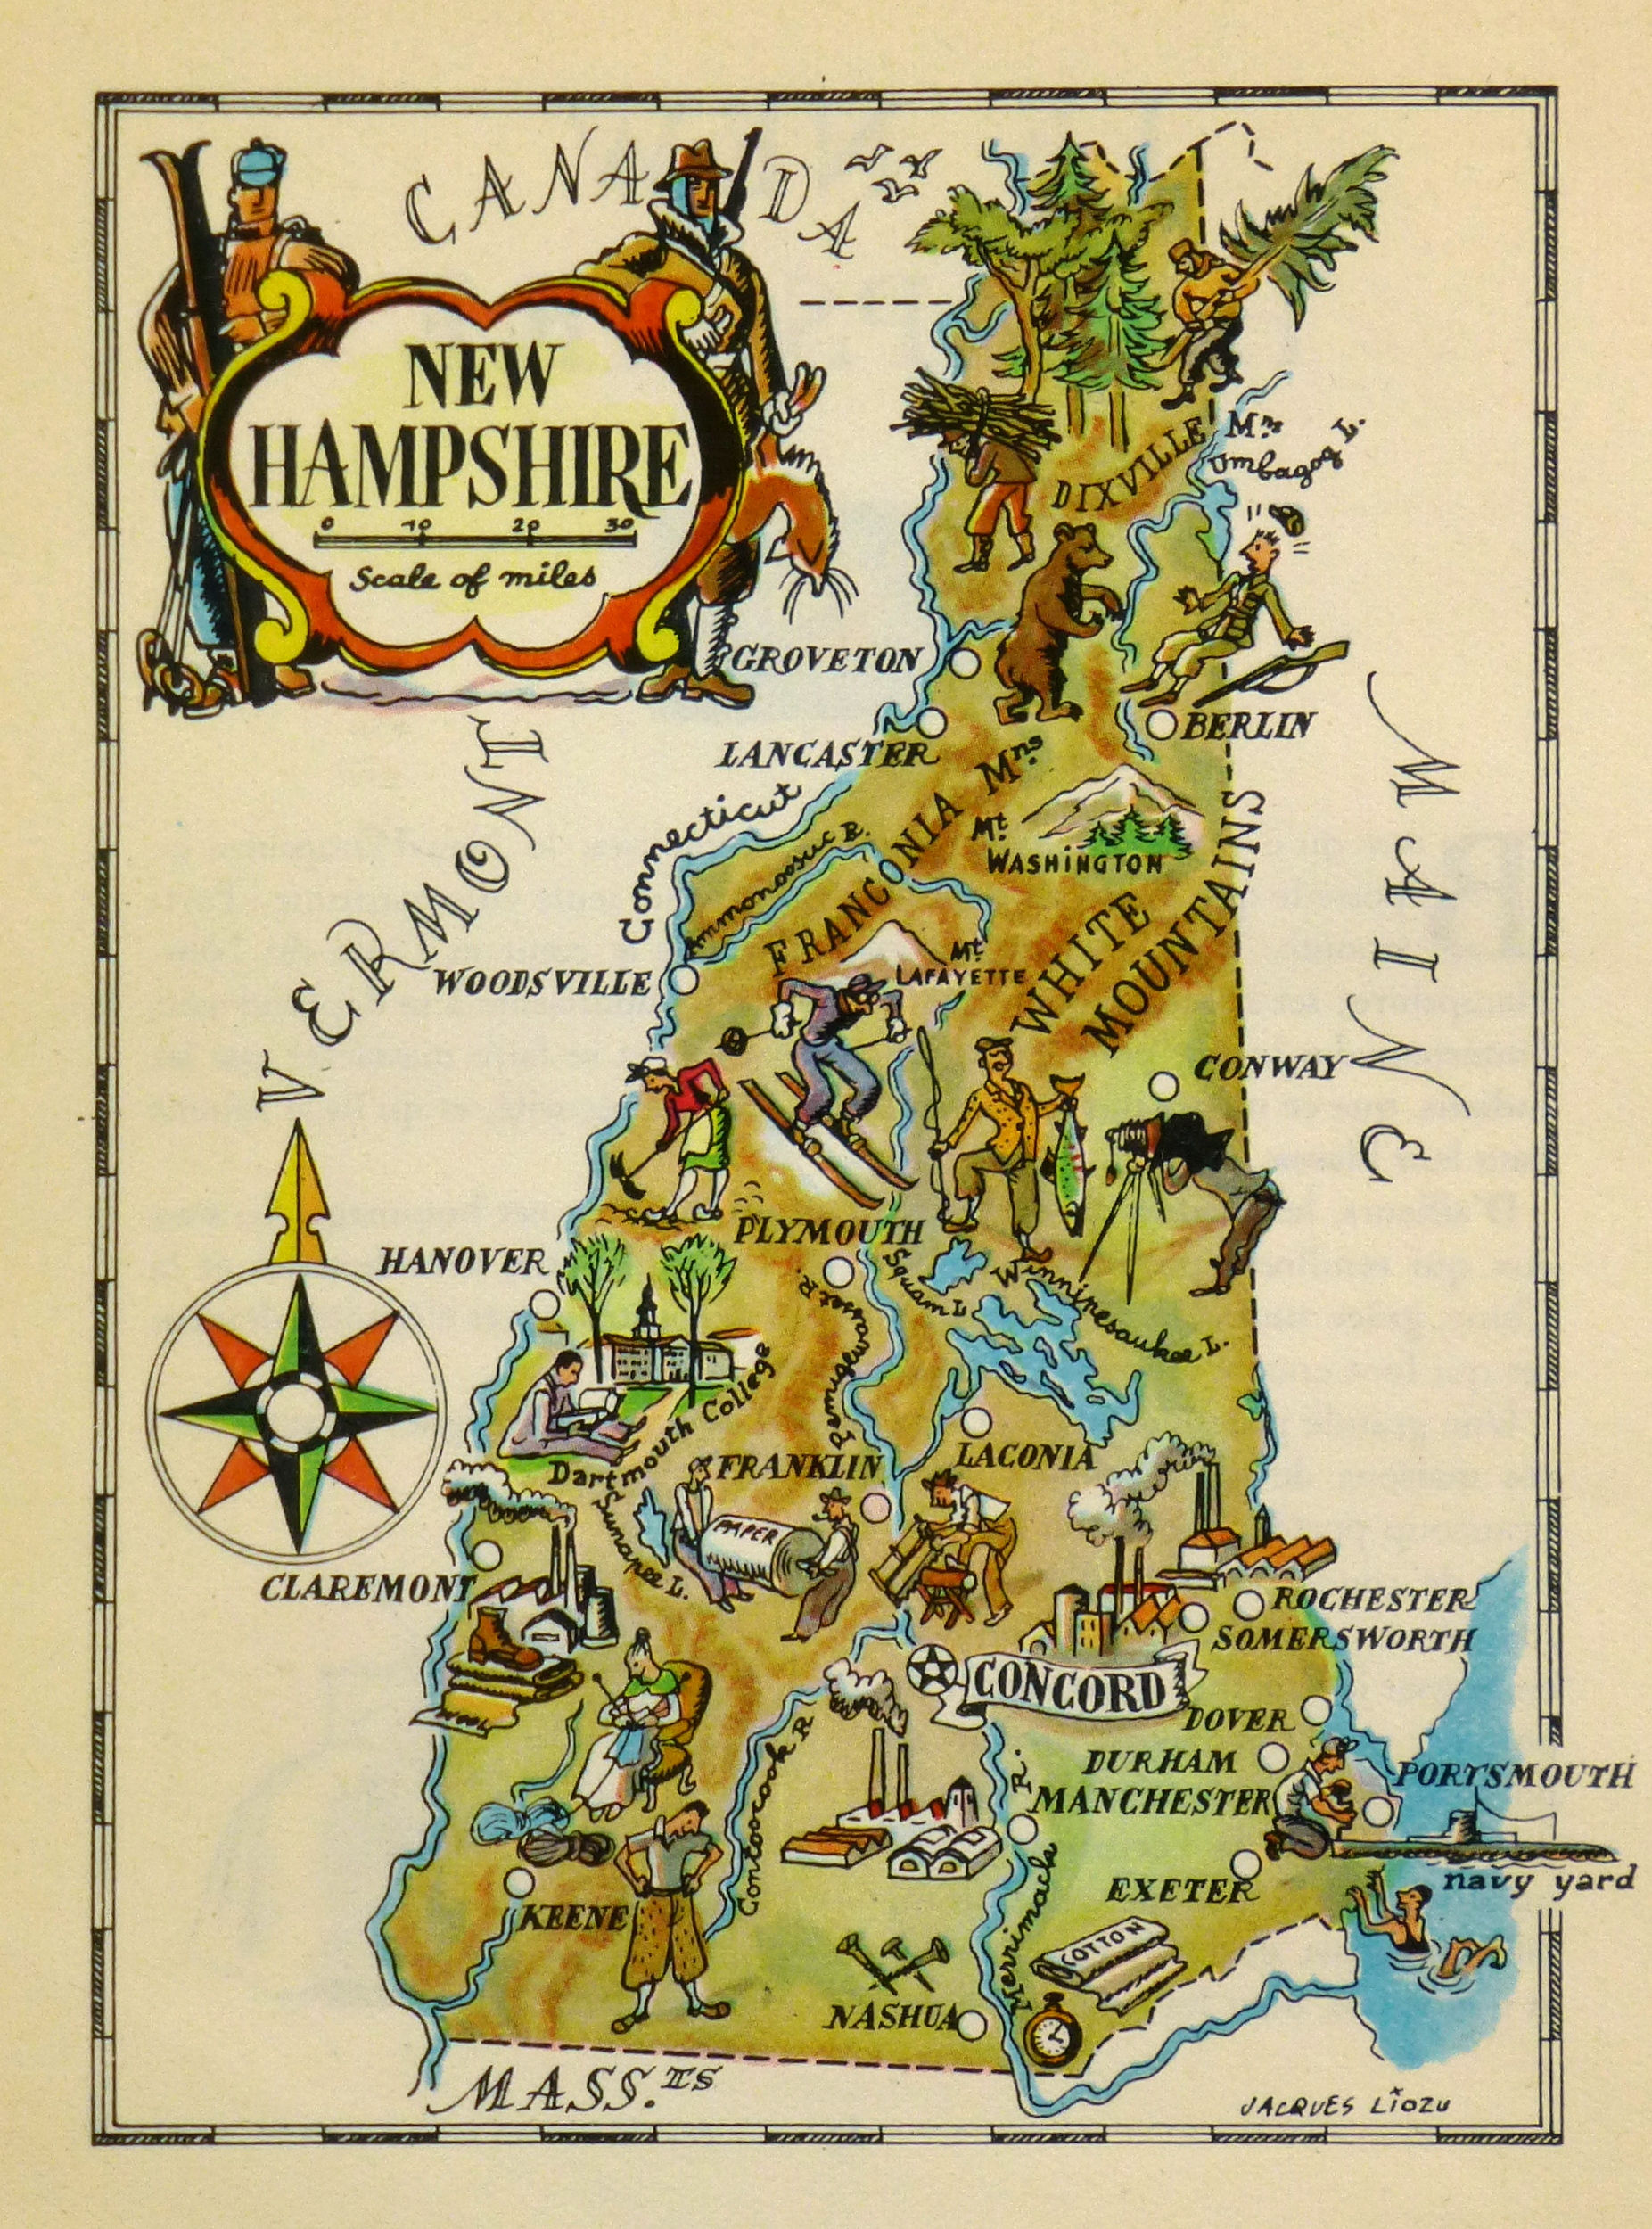 New Hampshire Pictorial Map, 1946